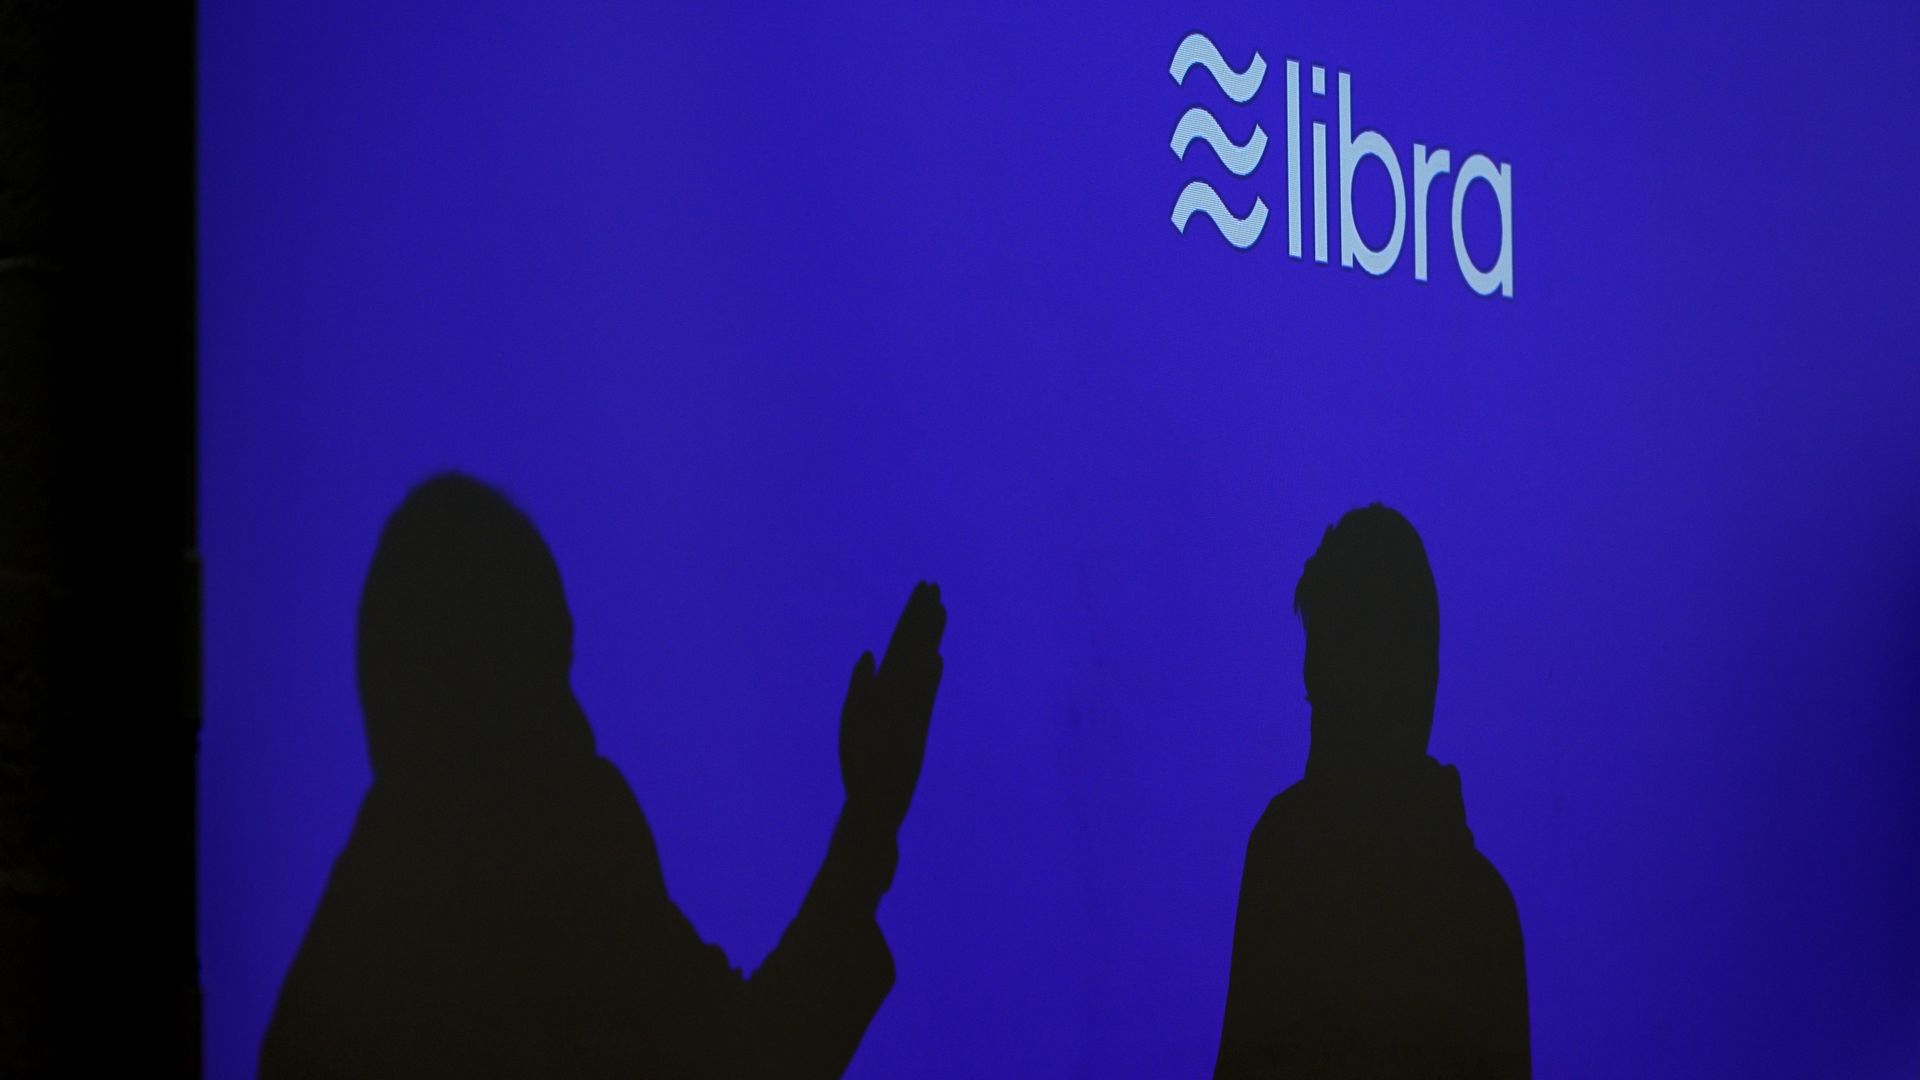 Logo of Facebook's cryptocurrency project Libra